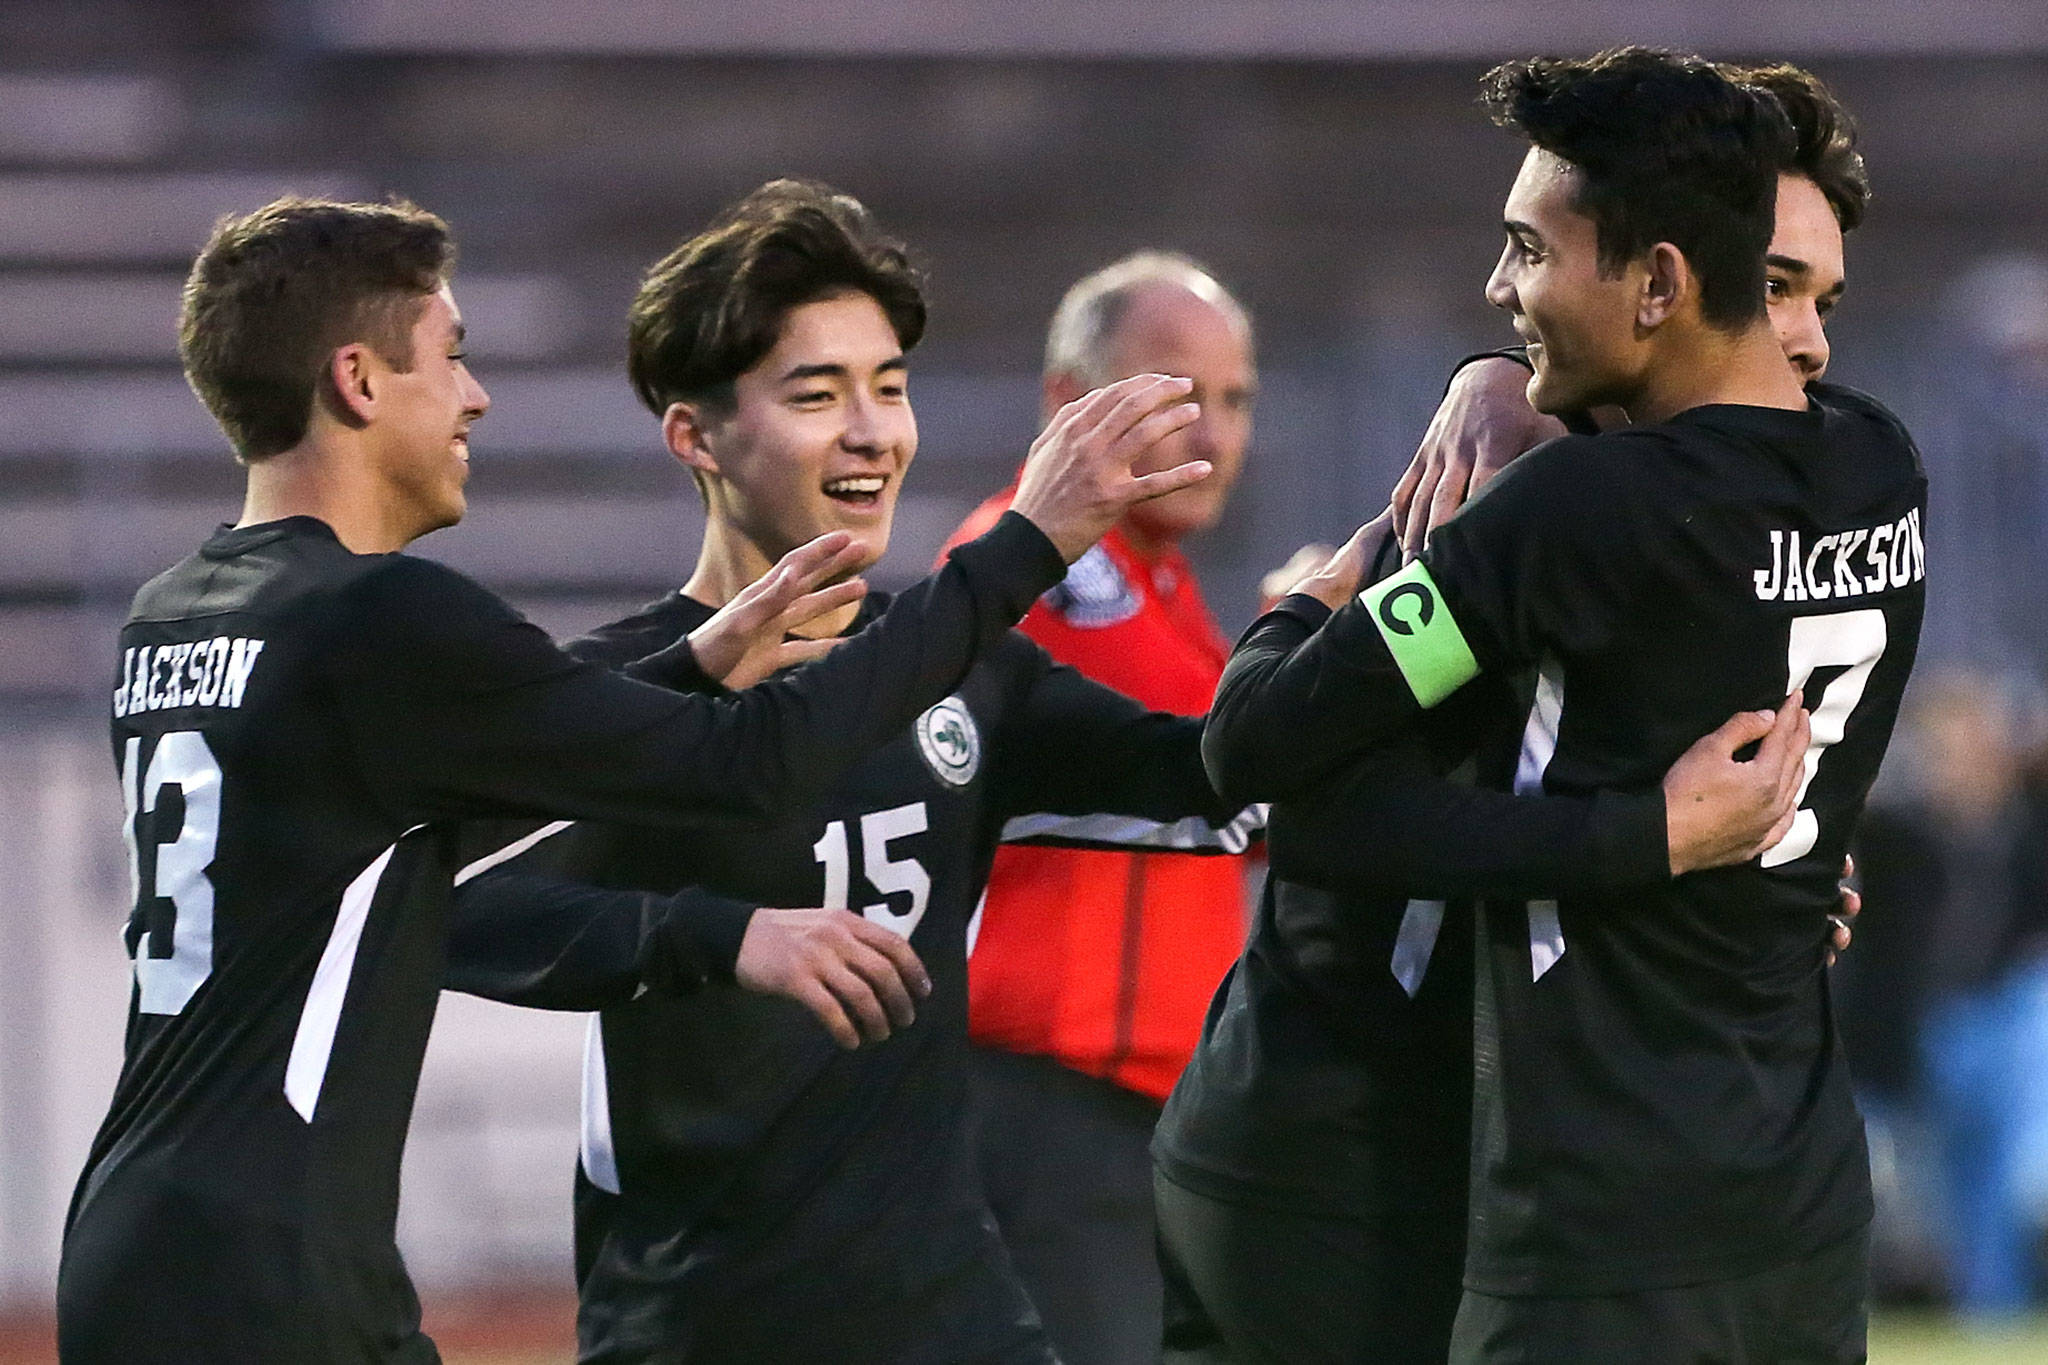 Coming off a Wesco 4A title and a bi-district crown, the Jackson boys soccer team will make its first state appearance since 2011 when it faces Hazen in a Class 4A state opening-round match Tuesday night. (Kevin Clark / The Herald)